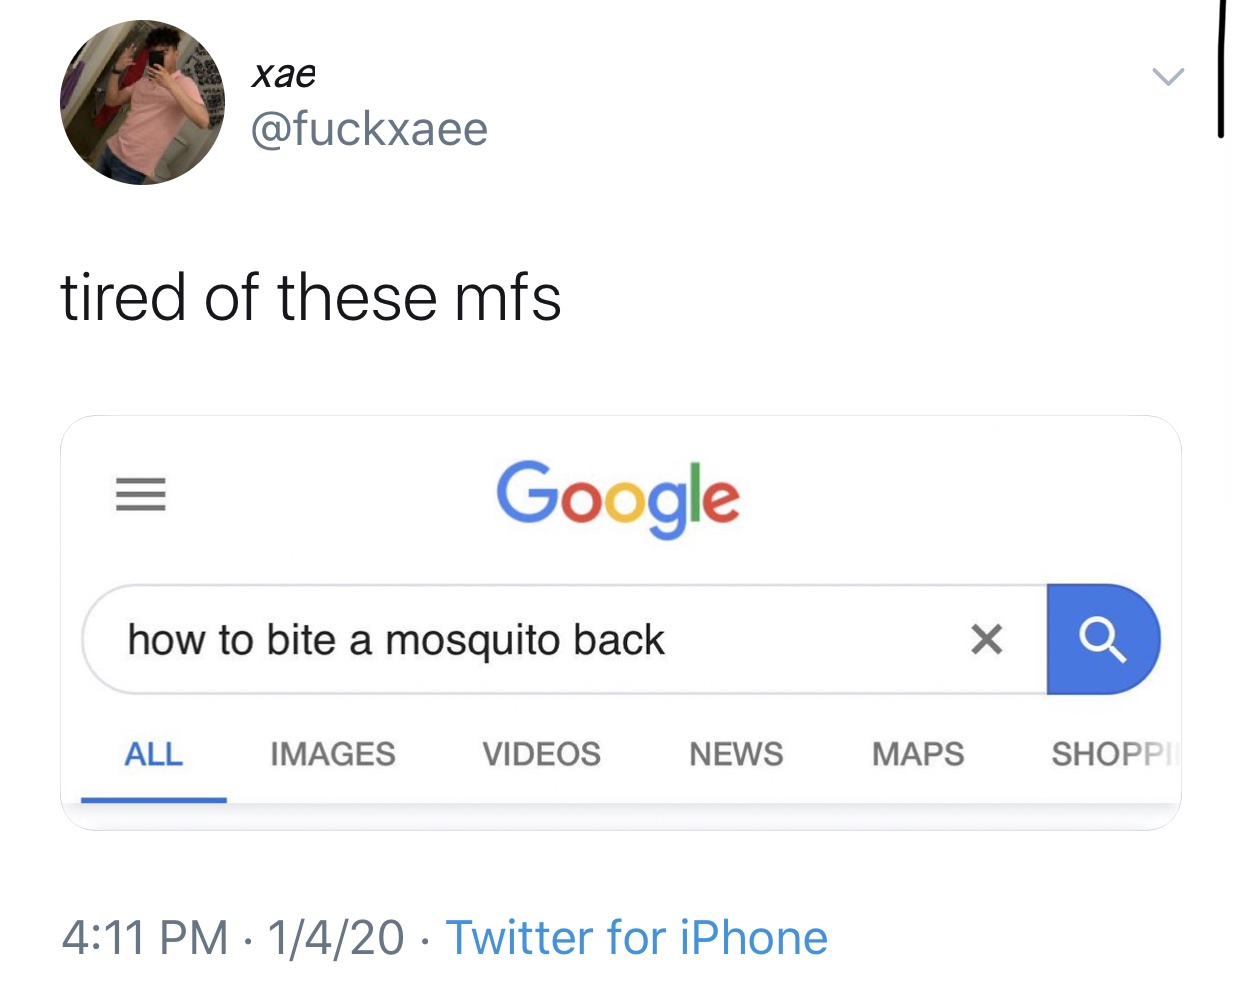 screenshot - xae tired of these mfs Google how to bite a mosquito back All Images Videos News Maps Shoppi 1420 Twitter for iPhone